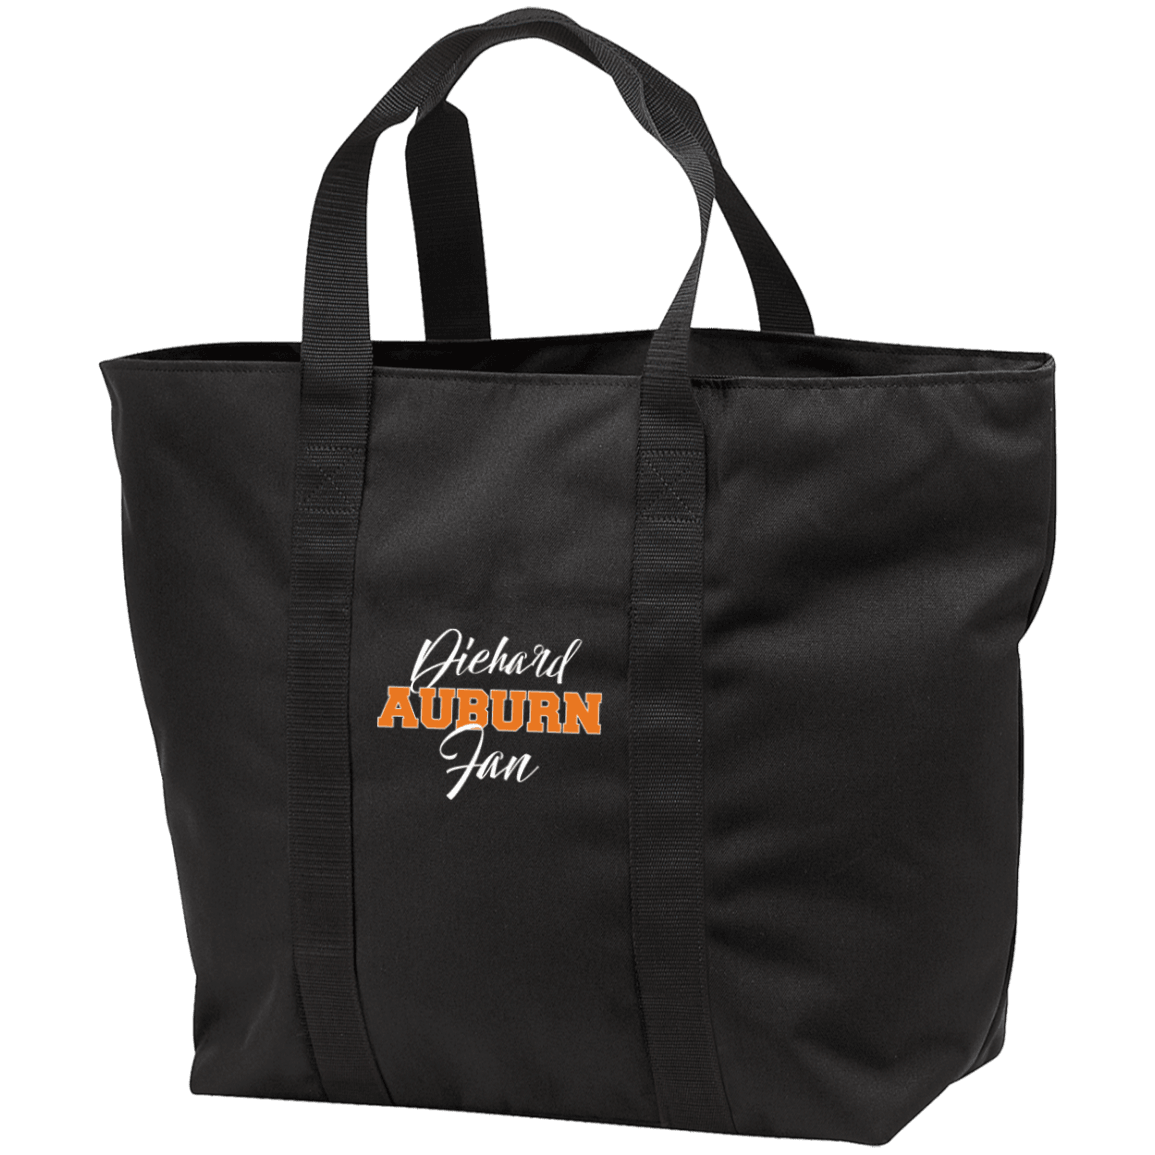 Designs by MyUtopia Shout Out:Diehard Auburn Fan Embroidered Port & Co. All Purpose Tote Bag w Zipper Closure and side pocket,Black/Black / One Size,Totebag